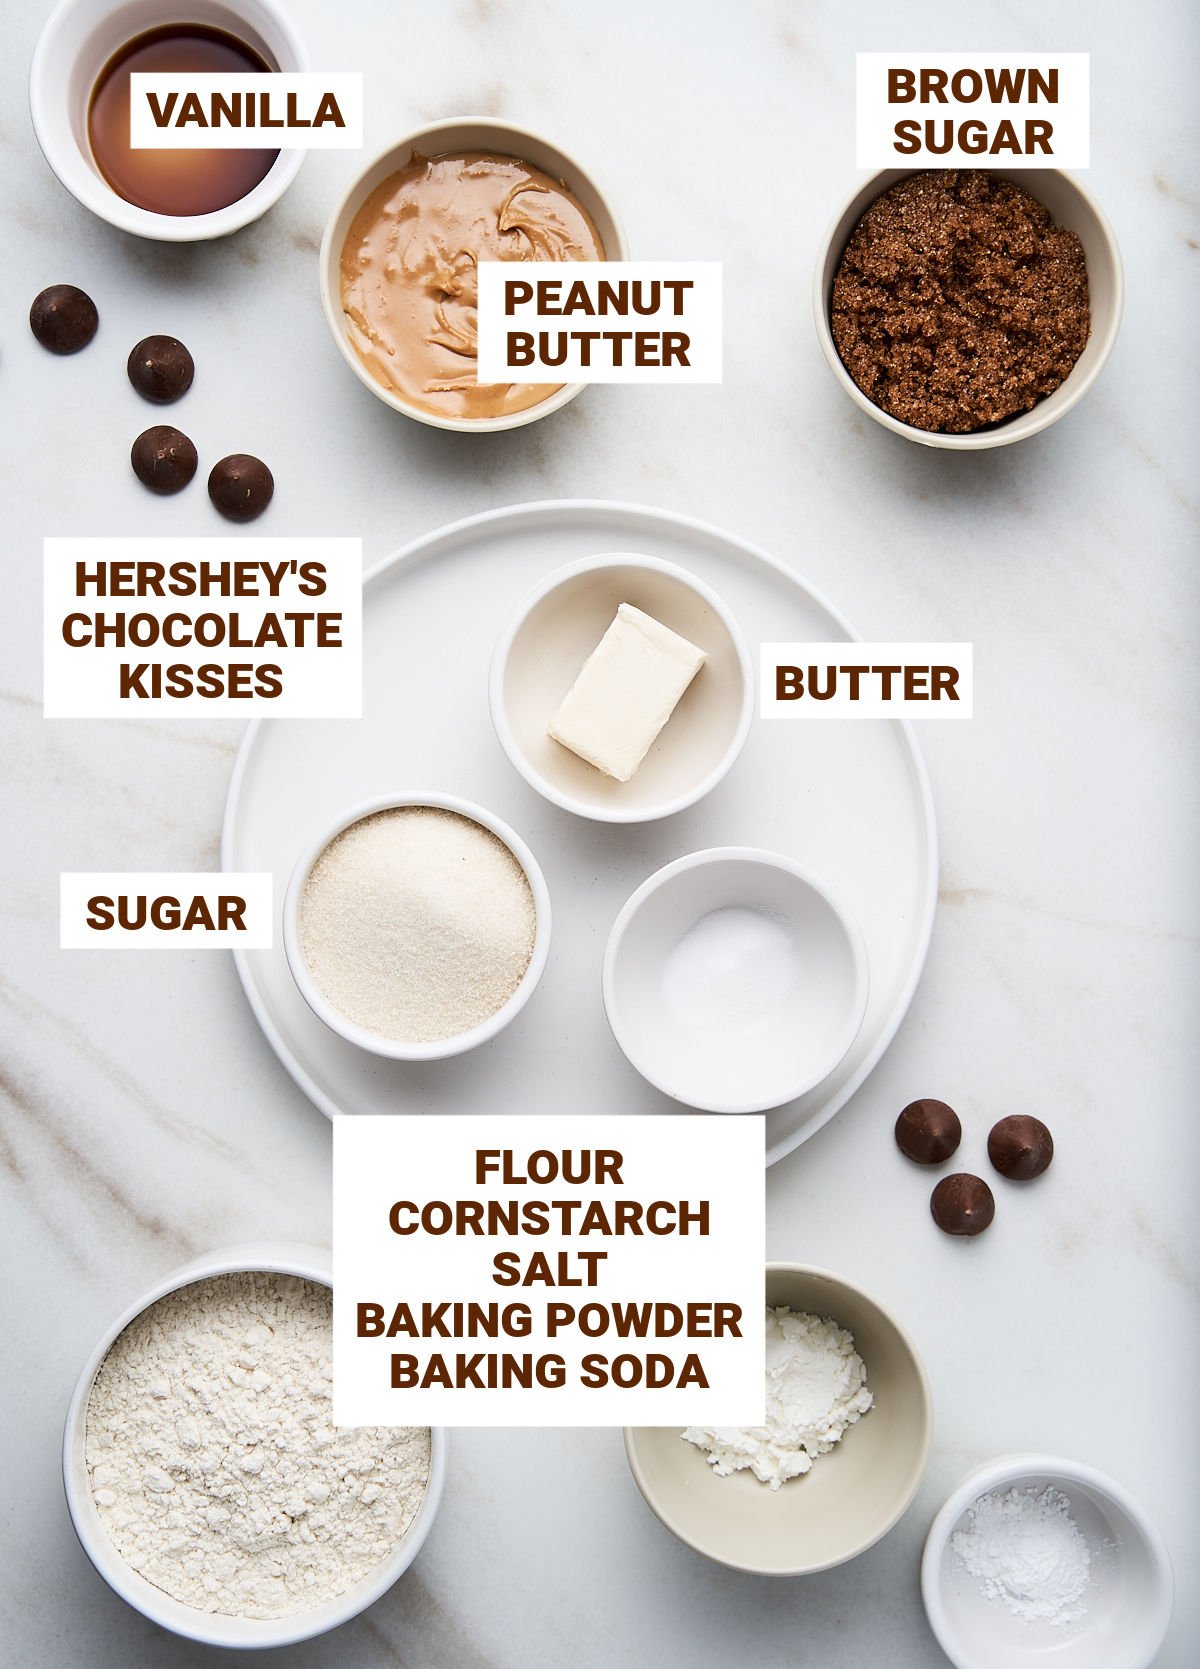 Ingredients for peanut butter cookies with chocolate kisses including flour mixture, brown and white sugar, vanilla, cornstarch.